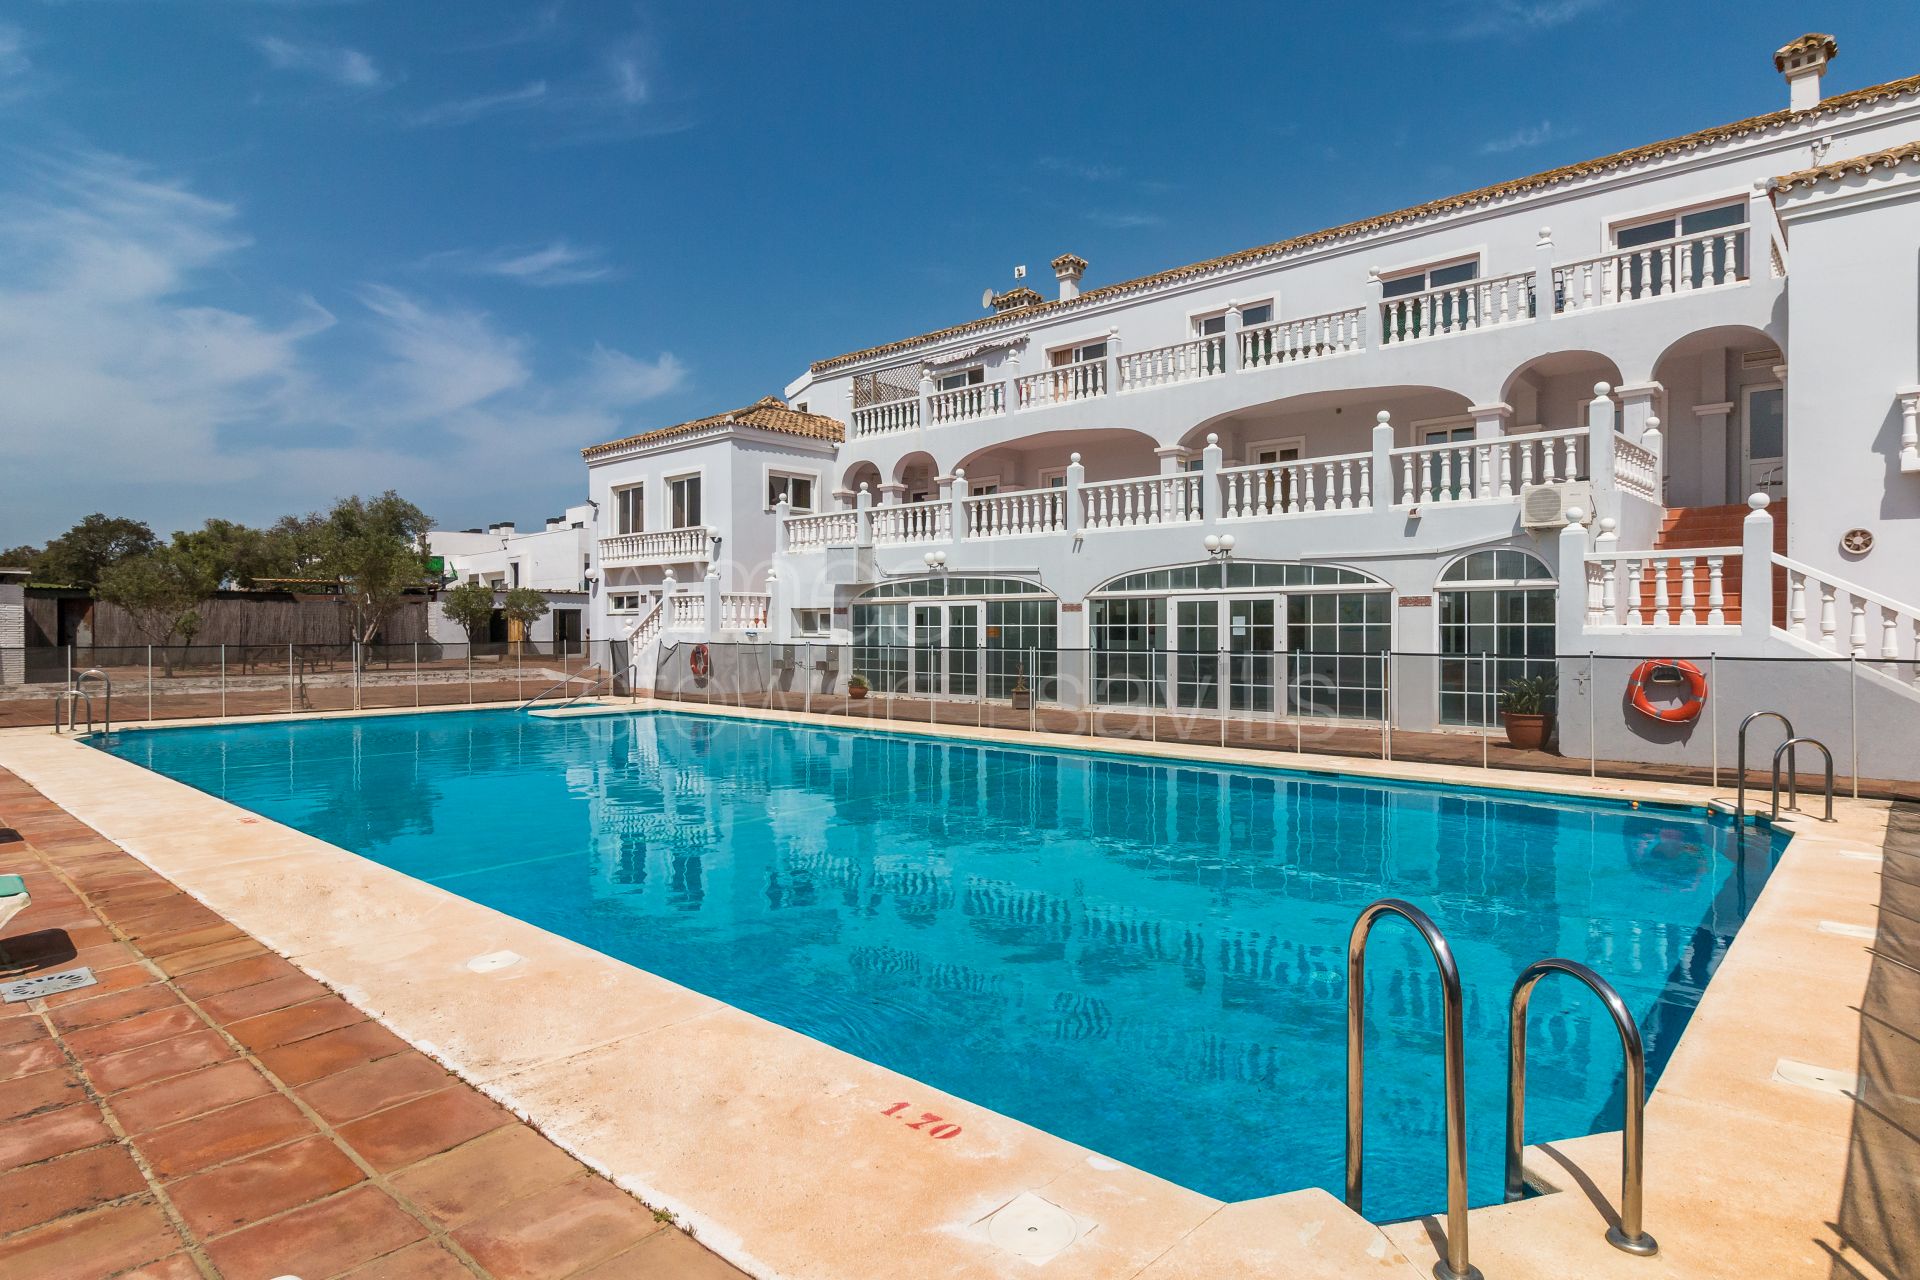 Unique opportunity to buy an 84 room Hotel in the grounds of The San Roque Club